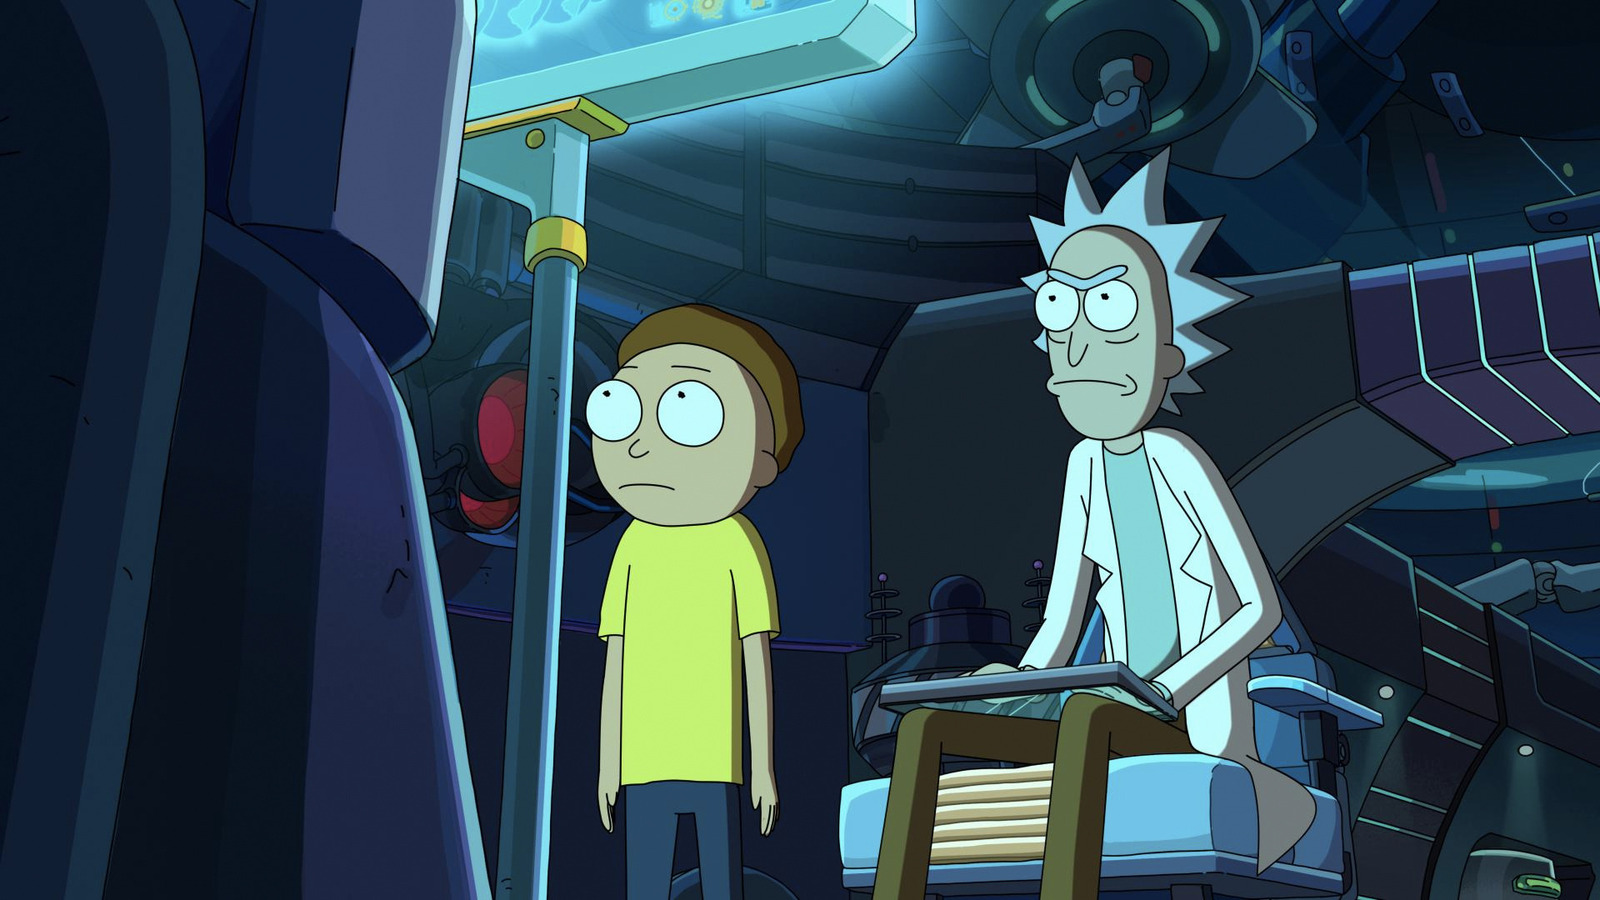 Rick and Morty Season 7 Episode 4 Streaming: How to Watch & Stream Online